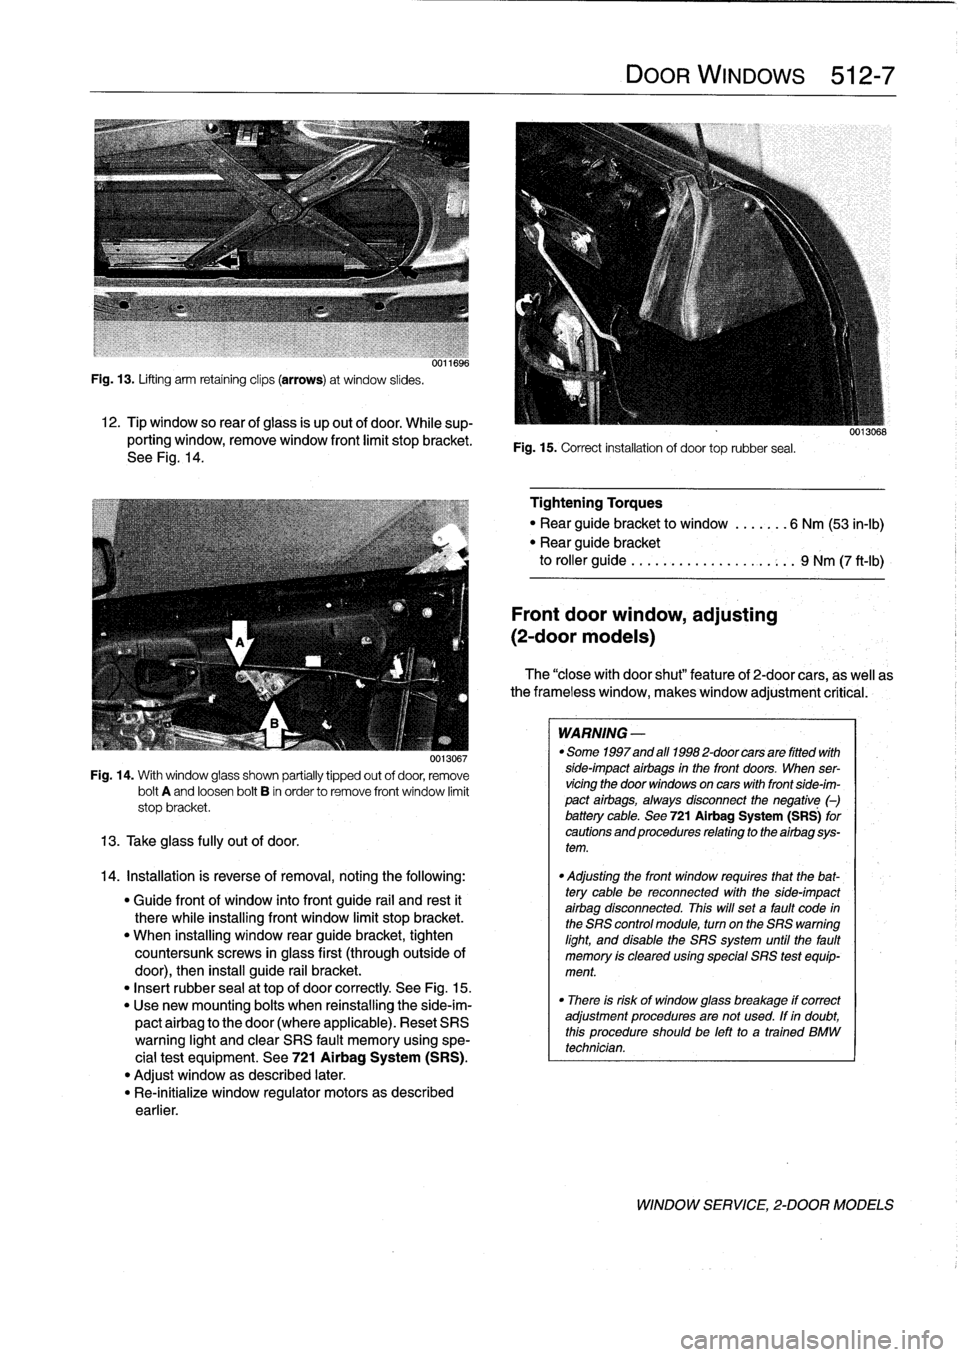 BMW 318i 1997 E36 User Guide 
Fig
.
13
.
Lifting
arm
retaining
clips
(arrows)
at
window
slides
.

12
.
Tip
window
so
rear
ofglass
is
up
out
of
door
.
While
sup-
porting
window,
remove
window
front
limit
stopbracket
.
See
Fig
.
14